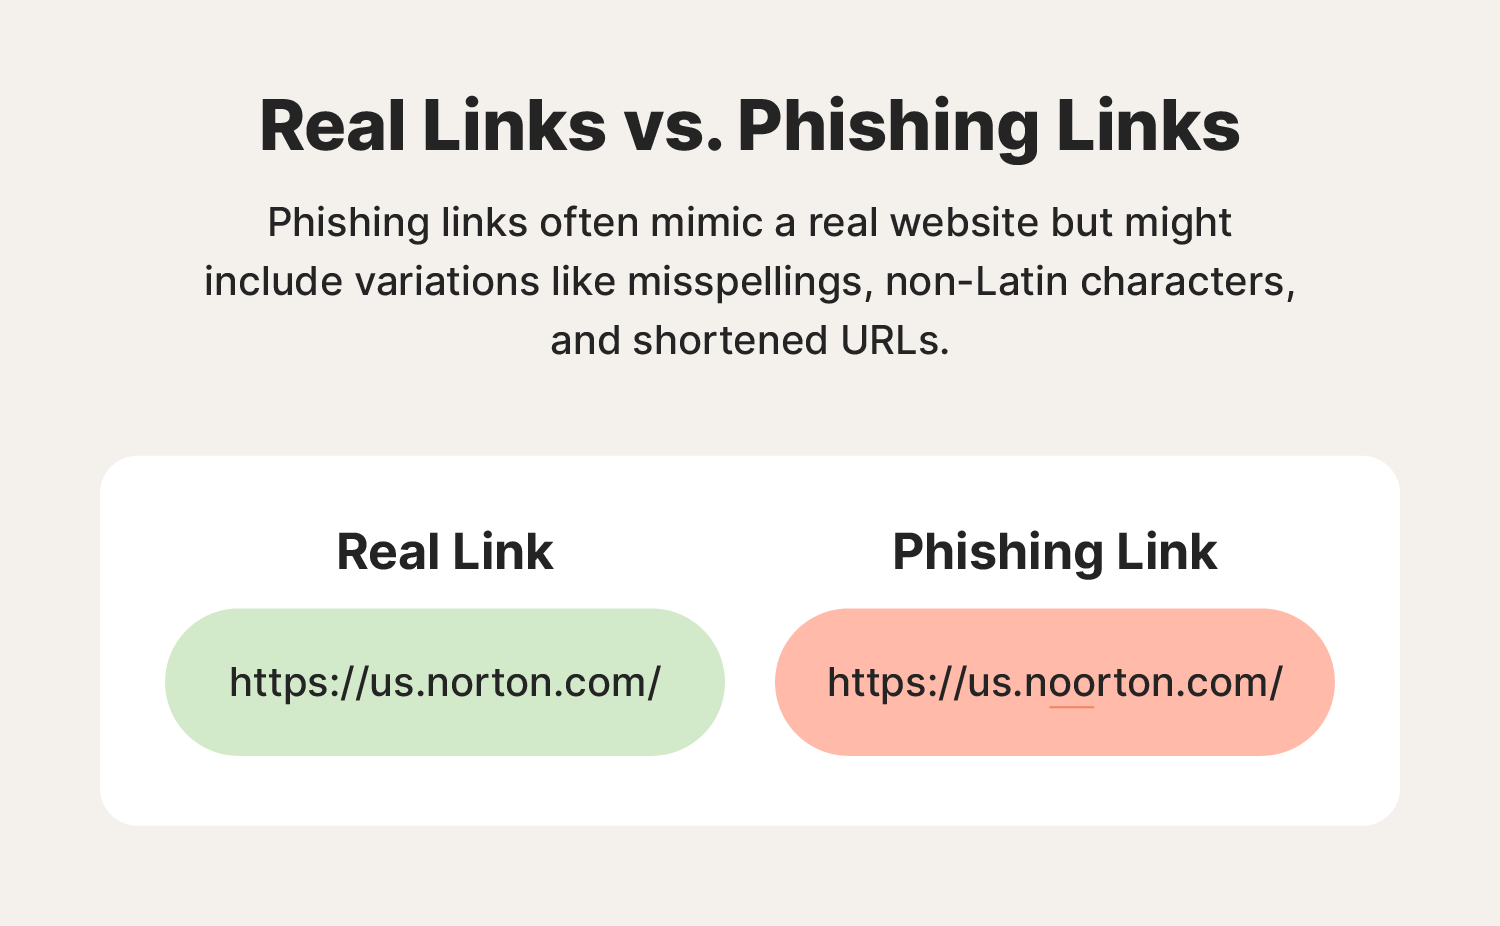 An image showing the difference between a real link and a phishing link.